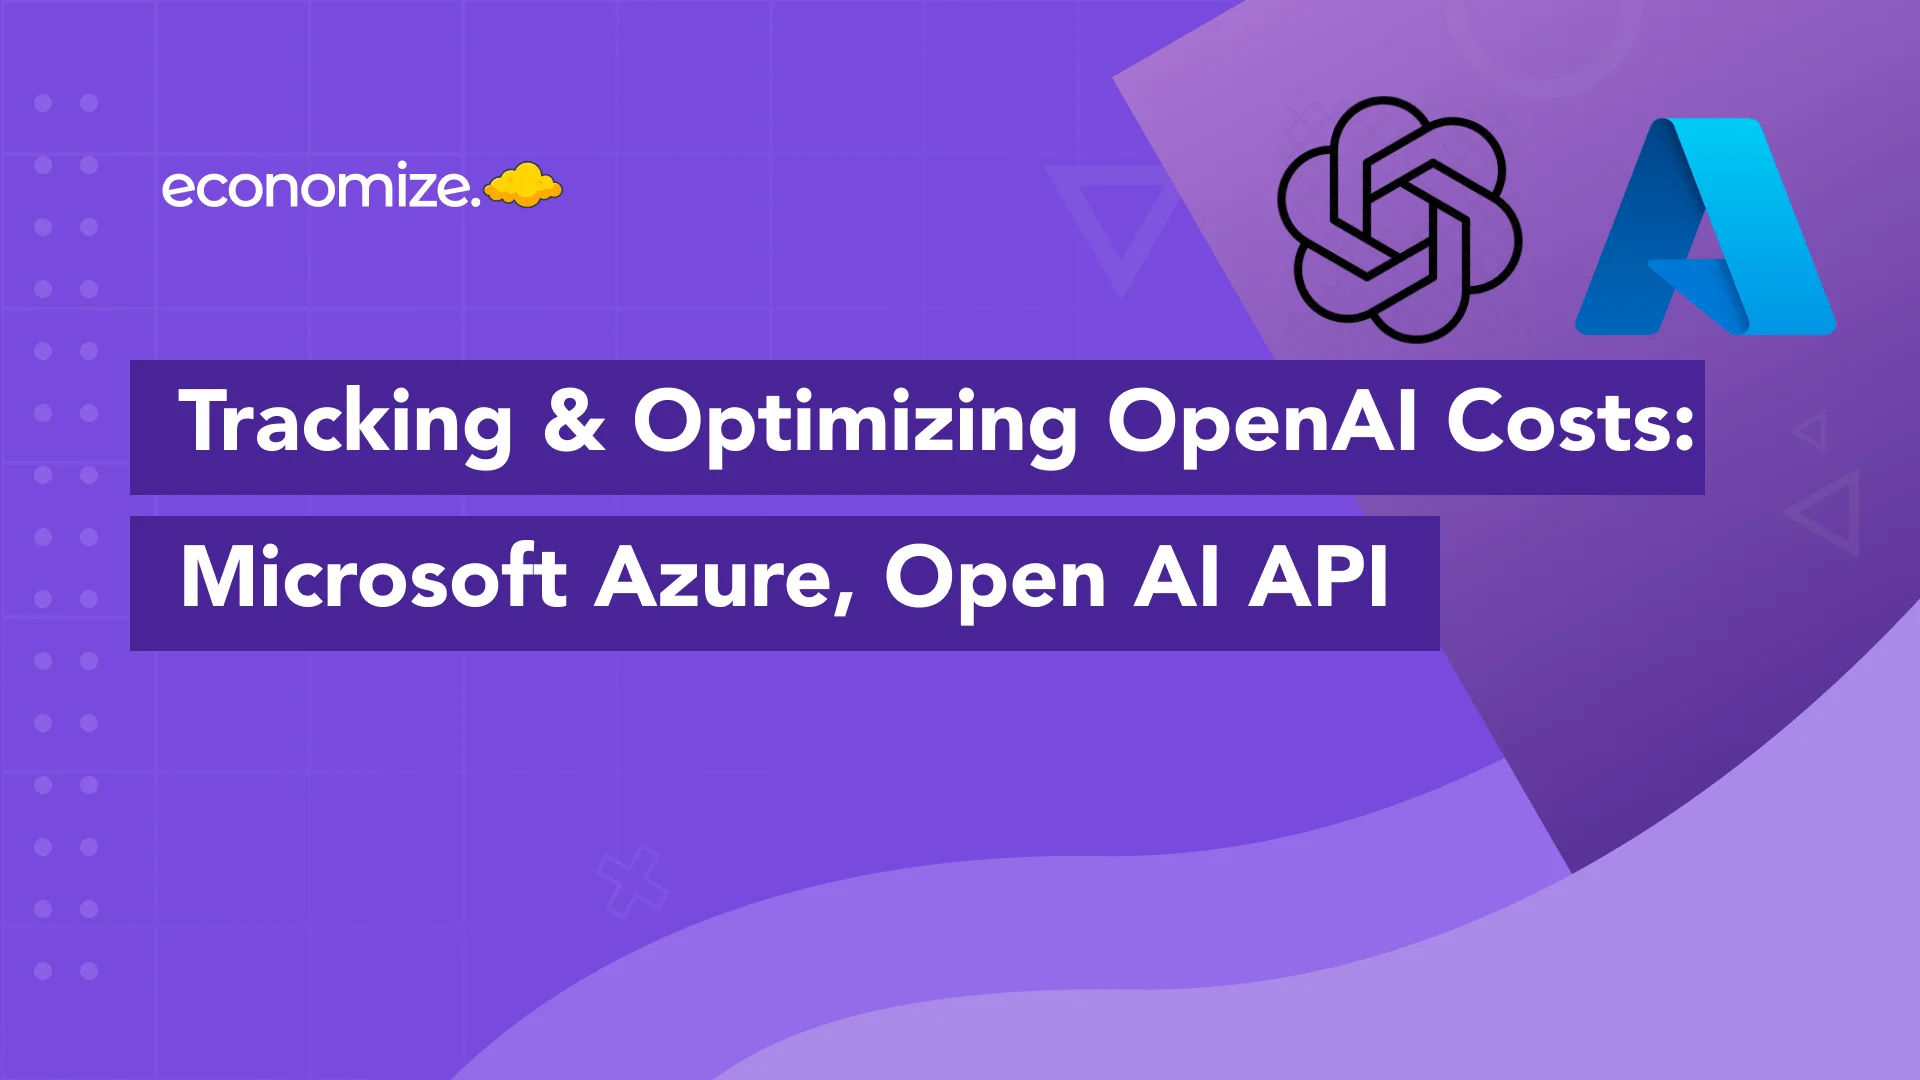 OpenAI Cost, Optimization, Monitoring, Tracking, Reduction, Recommendation, Best practices, OpenAI API, Azure, Service, Chat GPT, Dall-E,